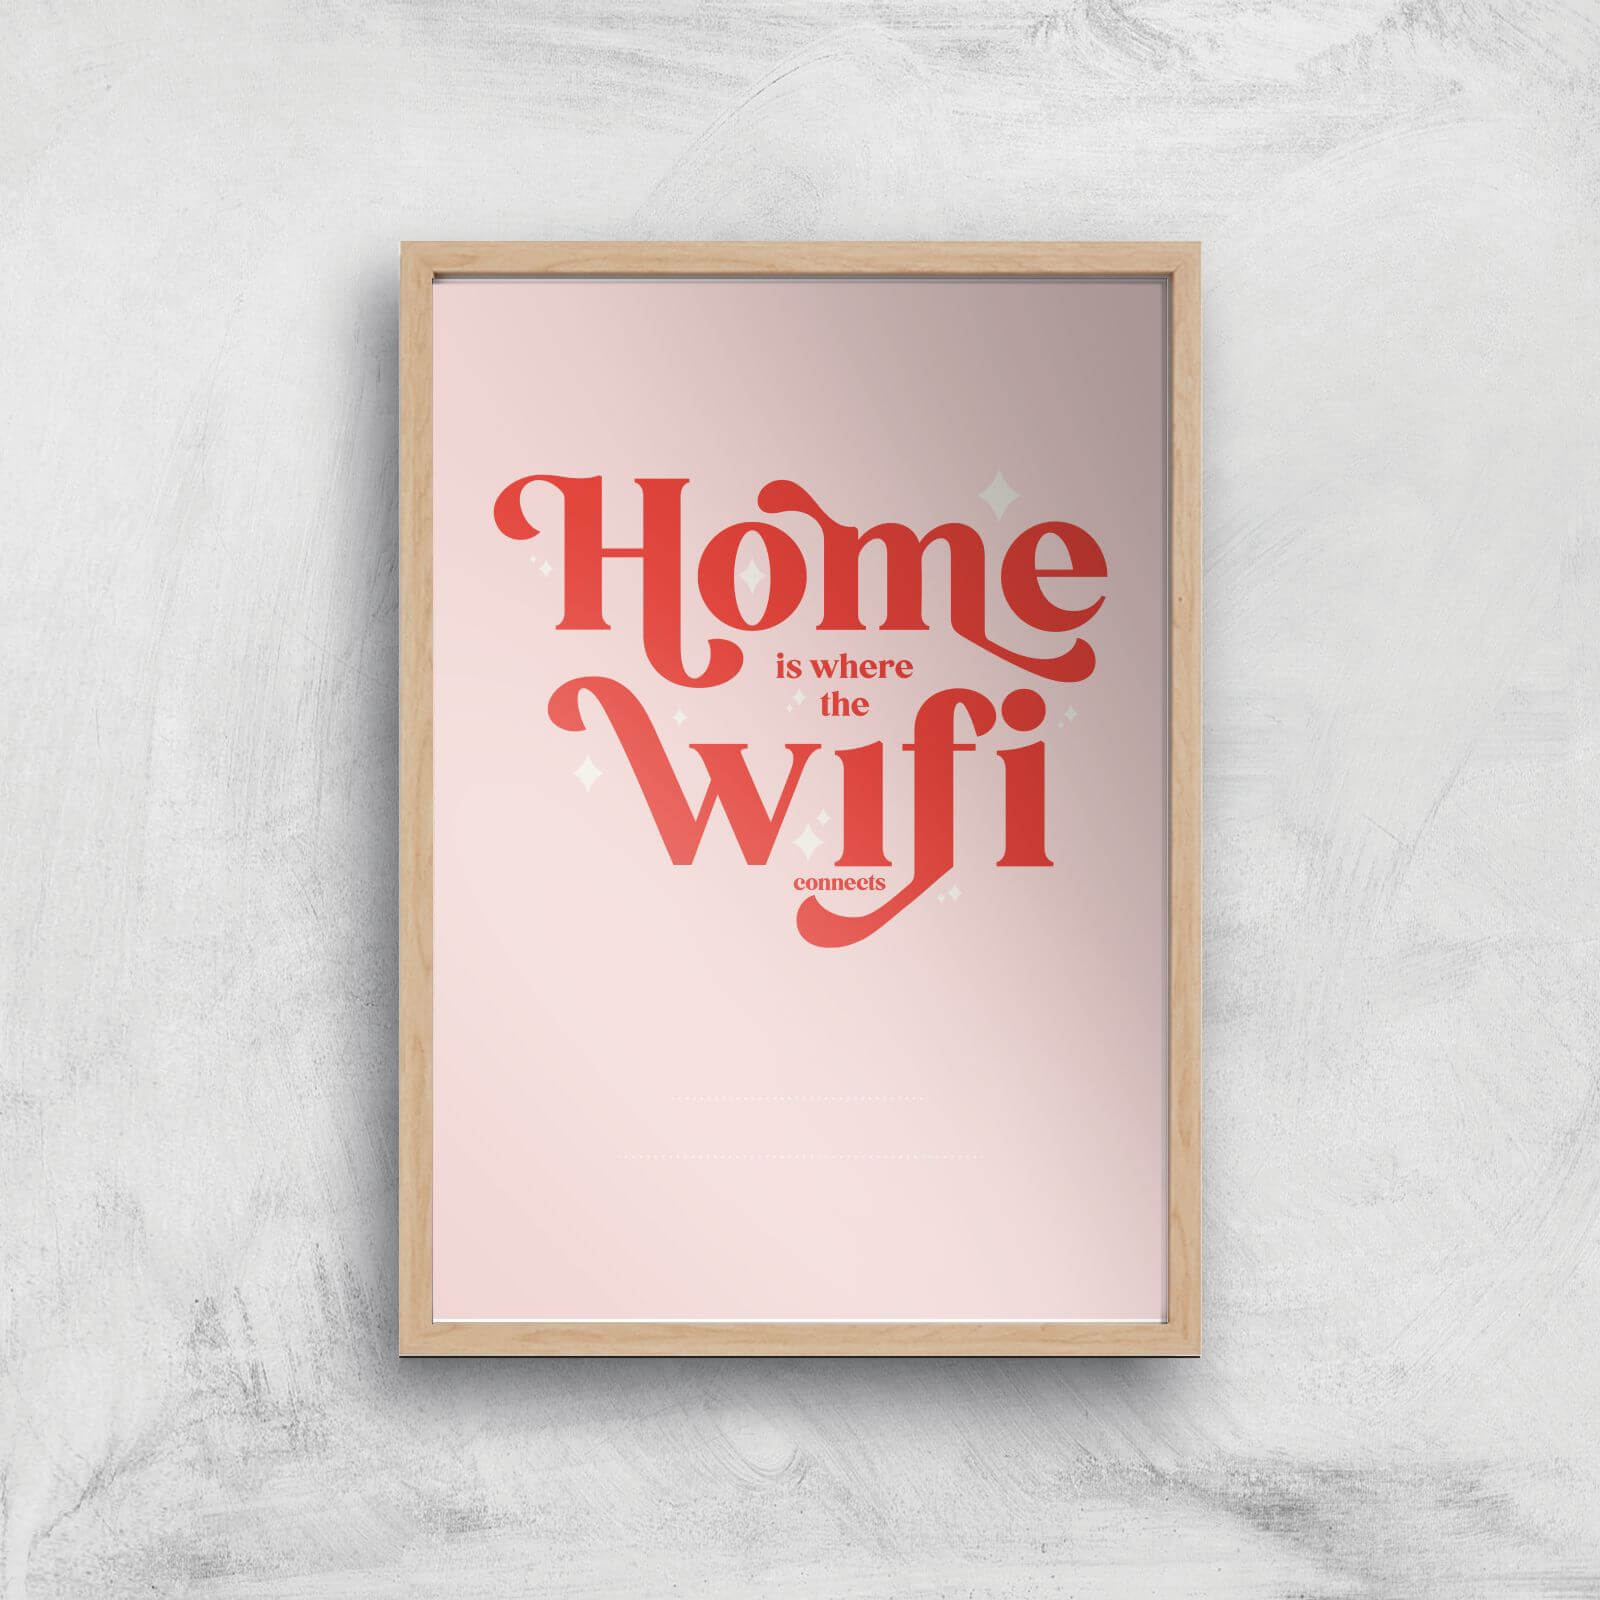 Hermione Chantal Light Home Is Where The Wifi Is Giclee Art Print - A4 - Wooden Frame